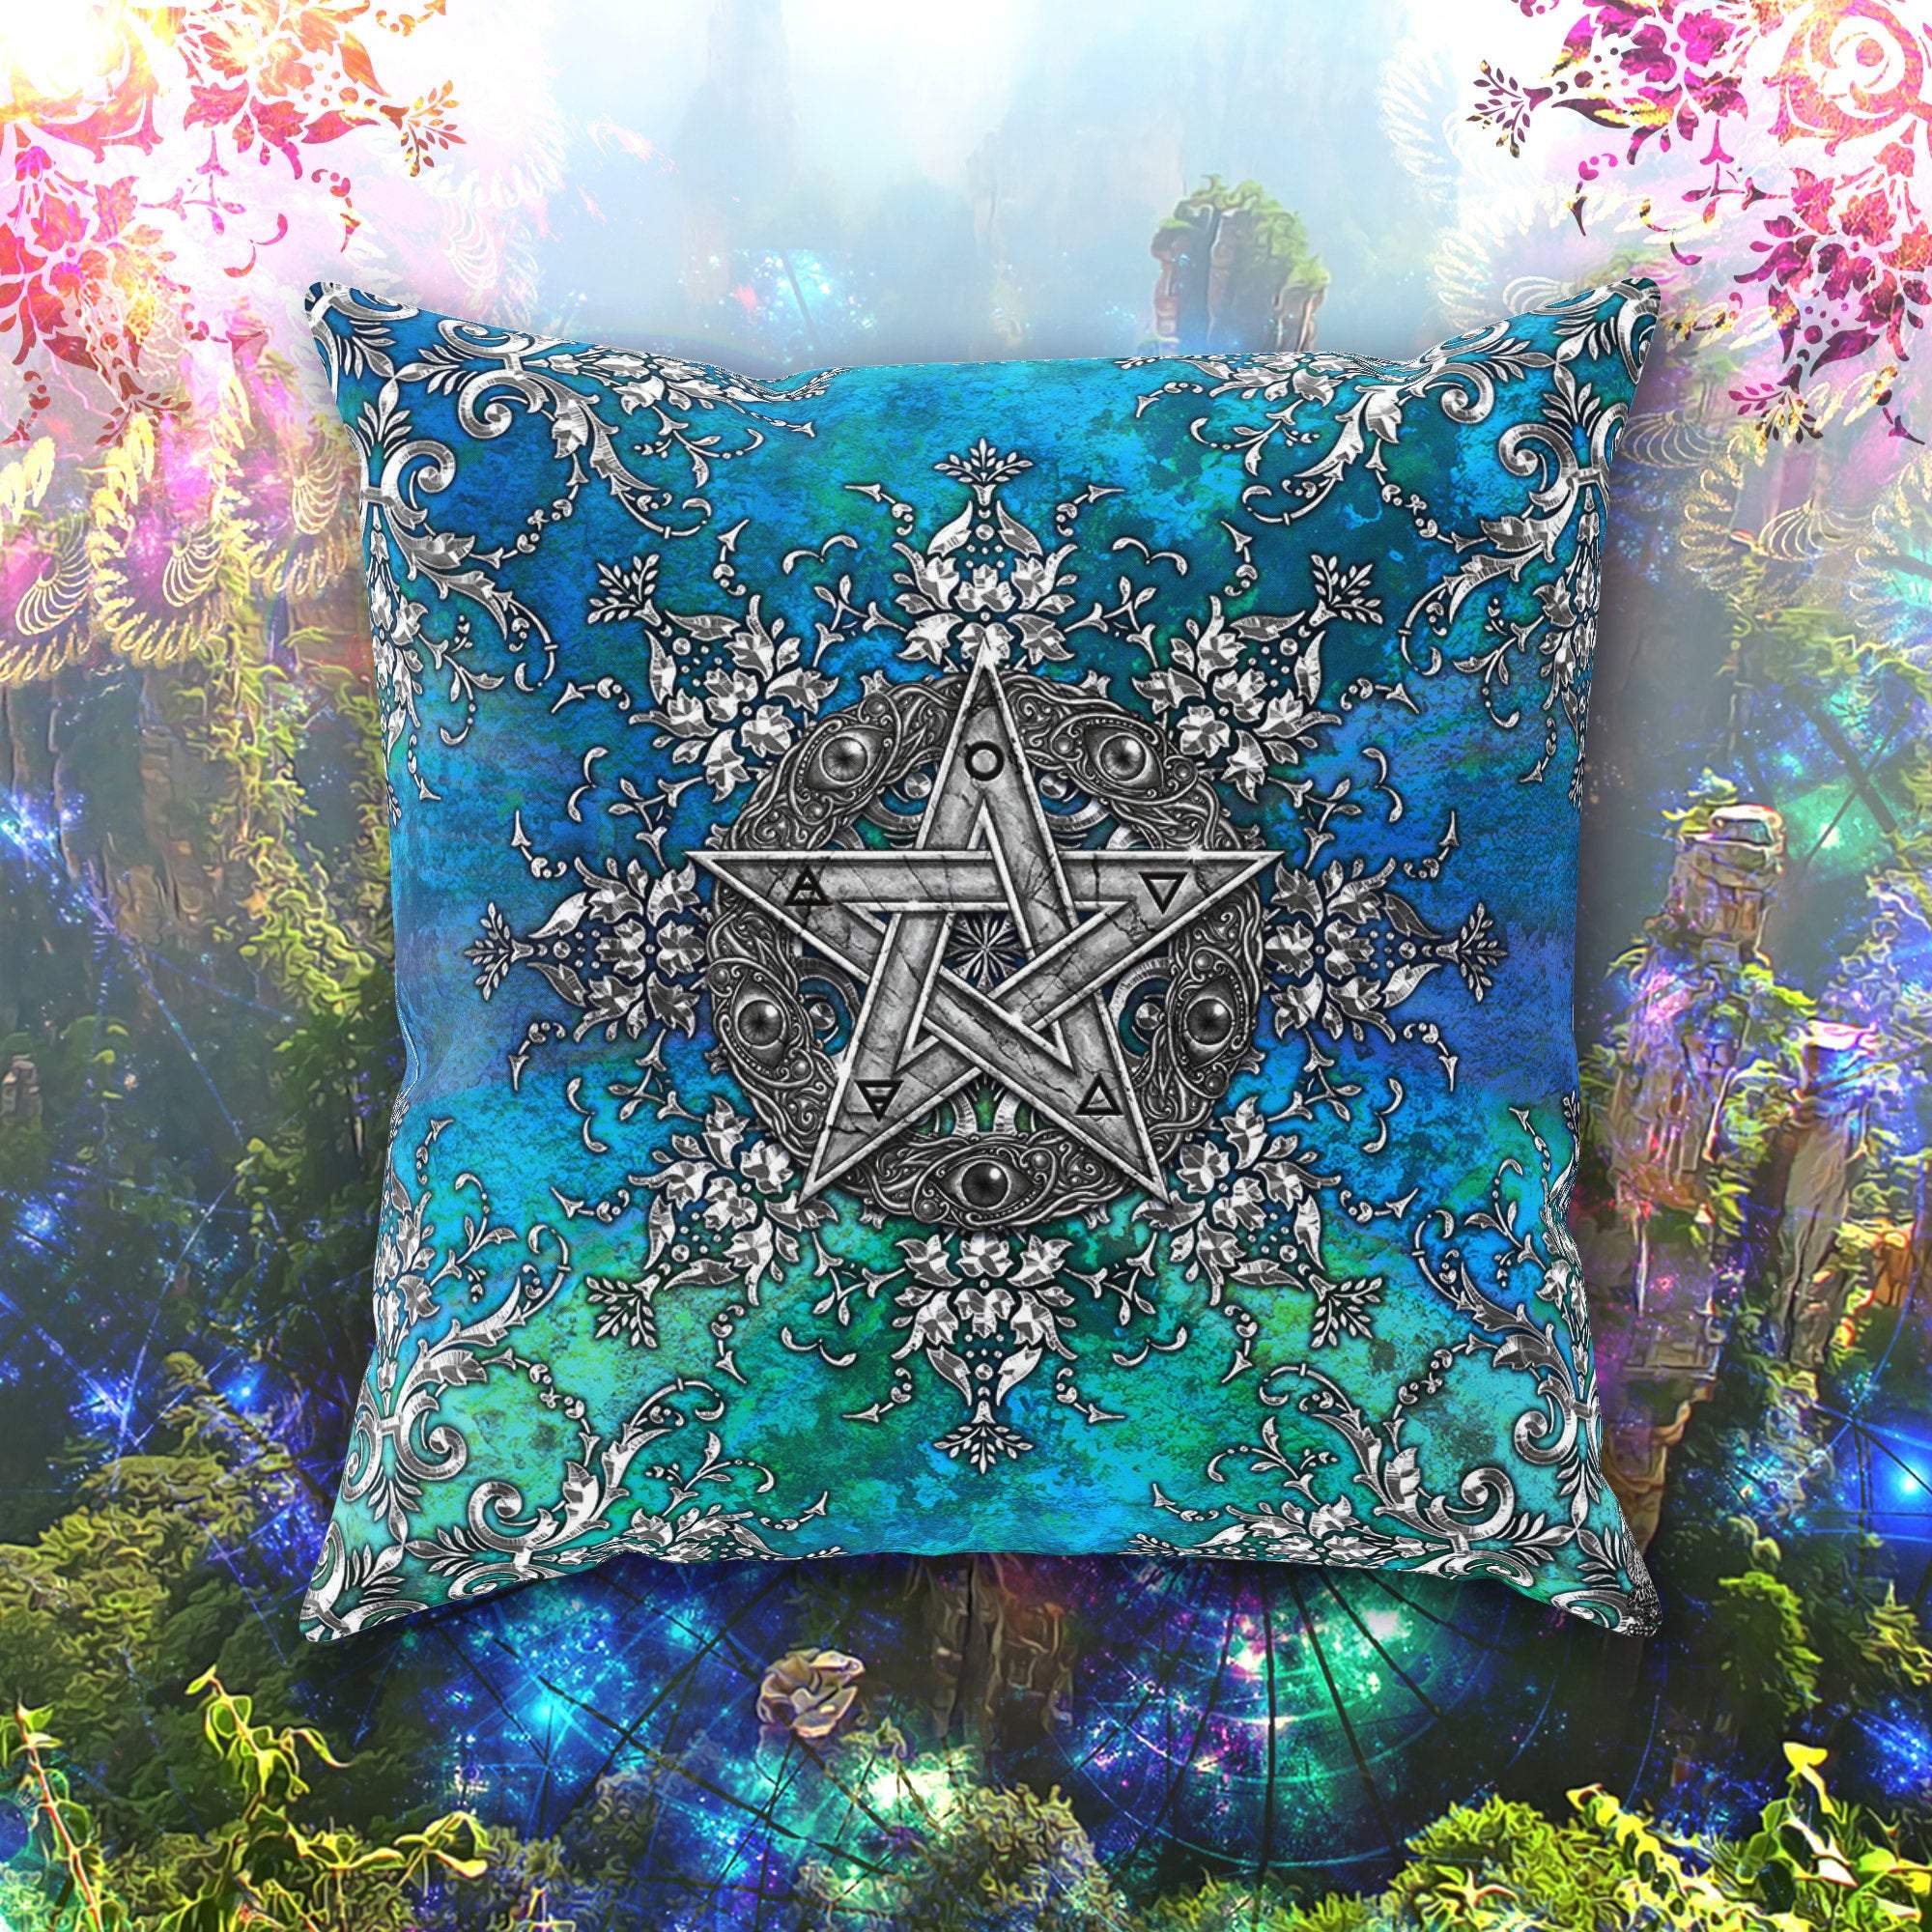 Witchy Throw Pillow, Decorative Accent Cushion, Wiccan Room Decor, Pentacle Decor, Pagan Art, Funky and Eclectic Home - Silver - Abysm Internal